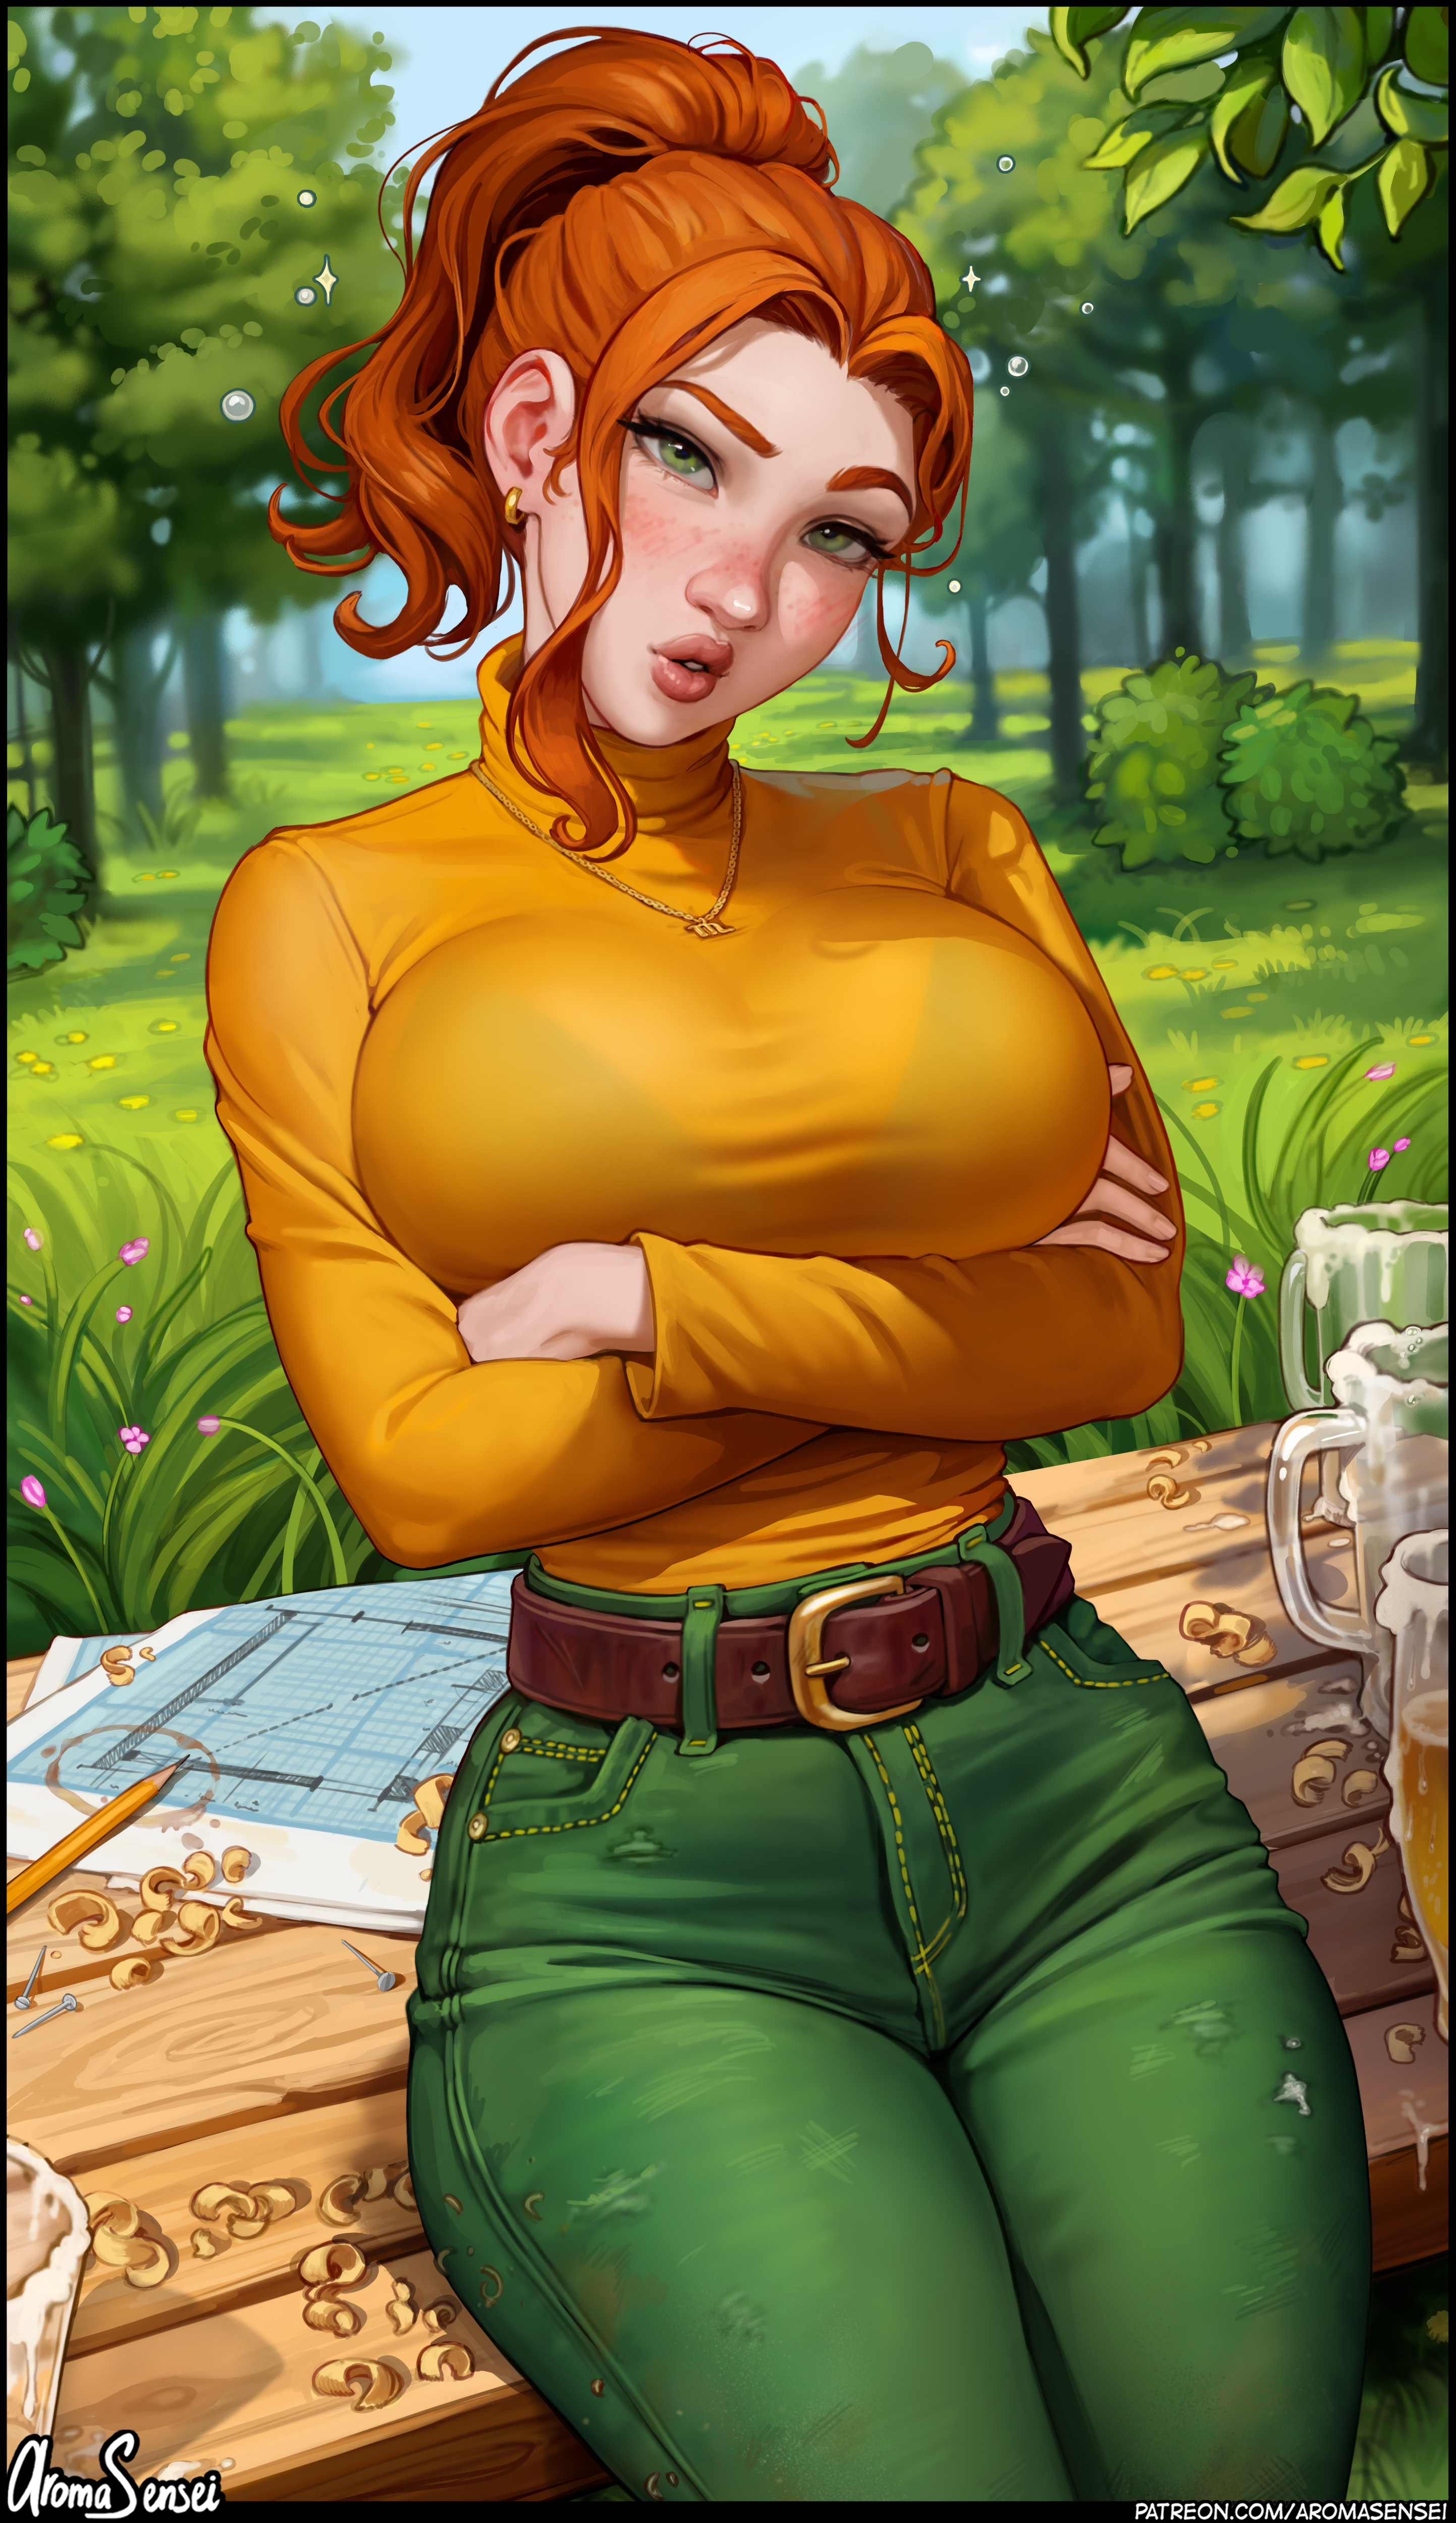 Robin Stardew Valley Stardew Valley Video Games Video Game Girls Video Game Characters Redhead Artwo 2886x5000